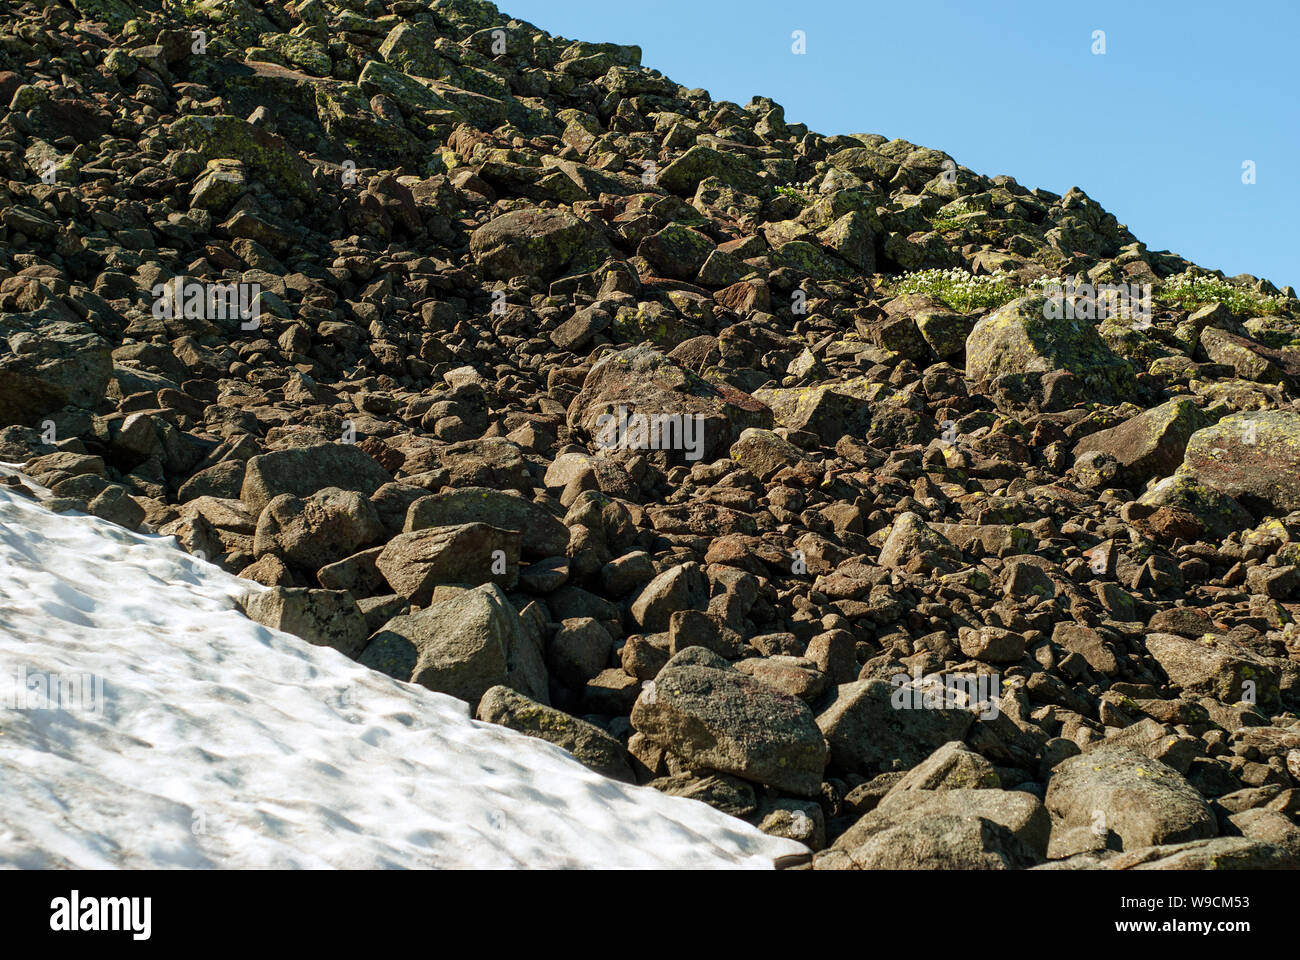 fragment of a stone scree on a slope on the edge of a melting glacier and a blue summer sky Stock Photo